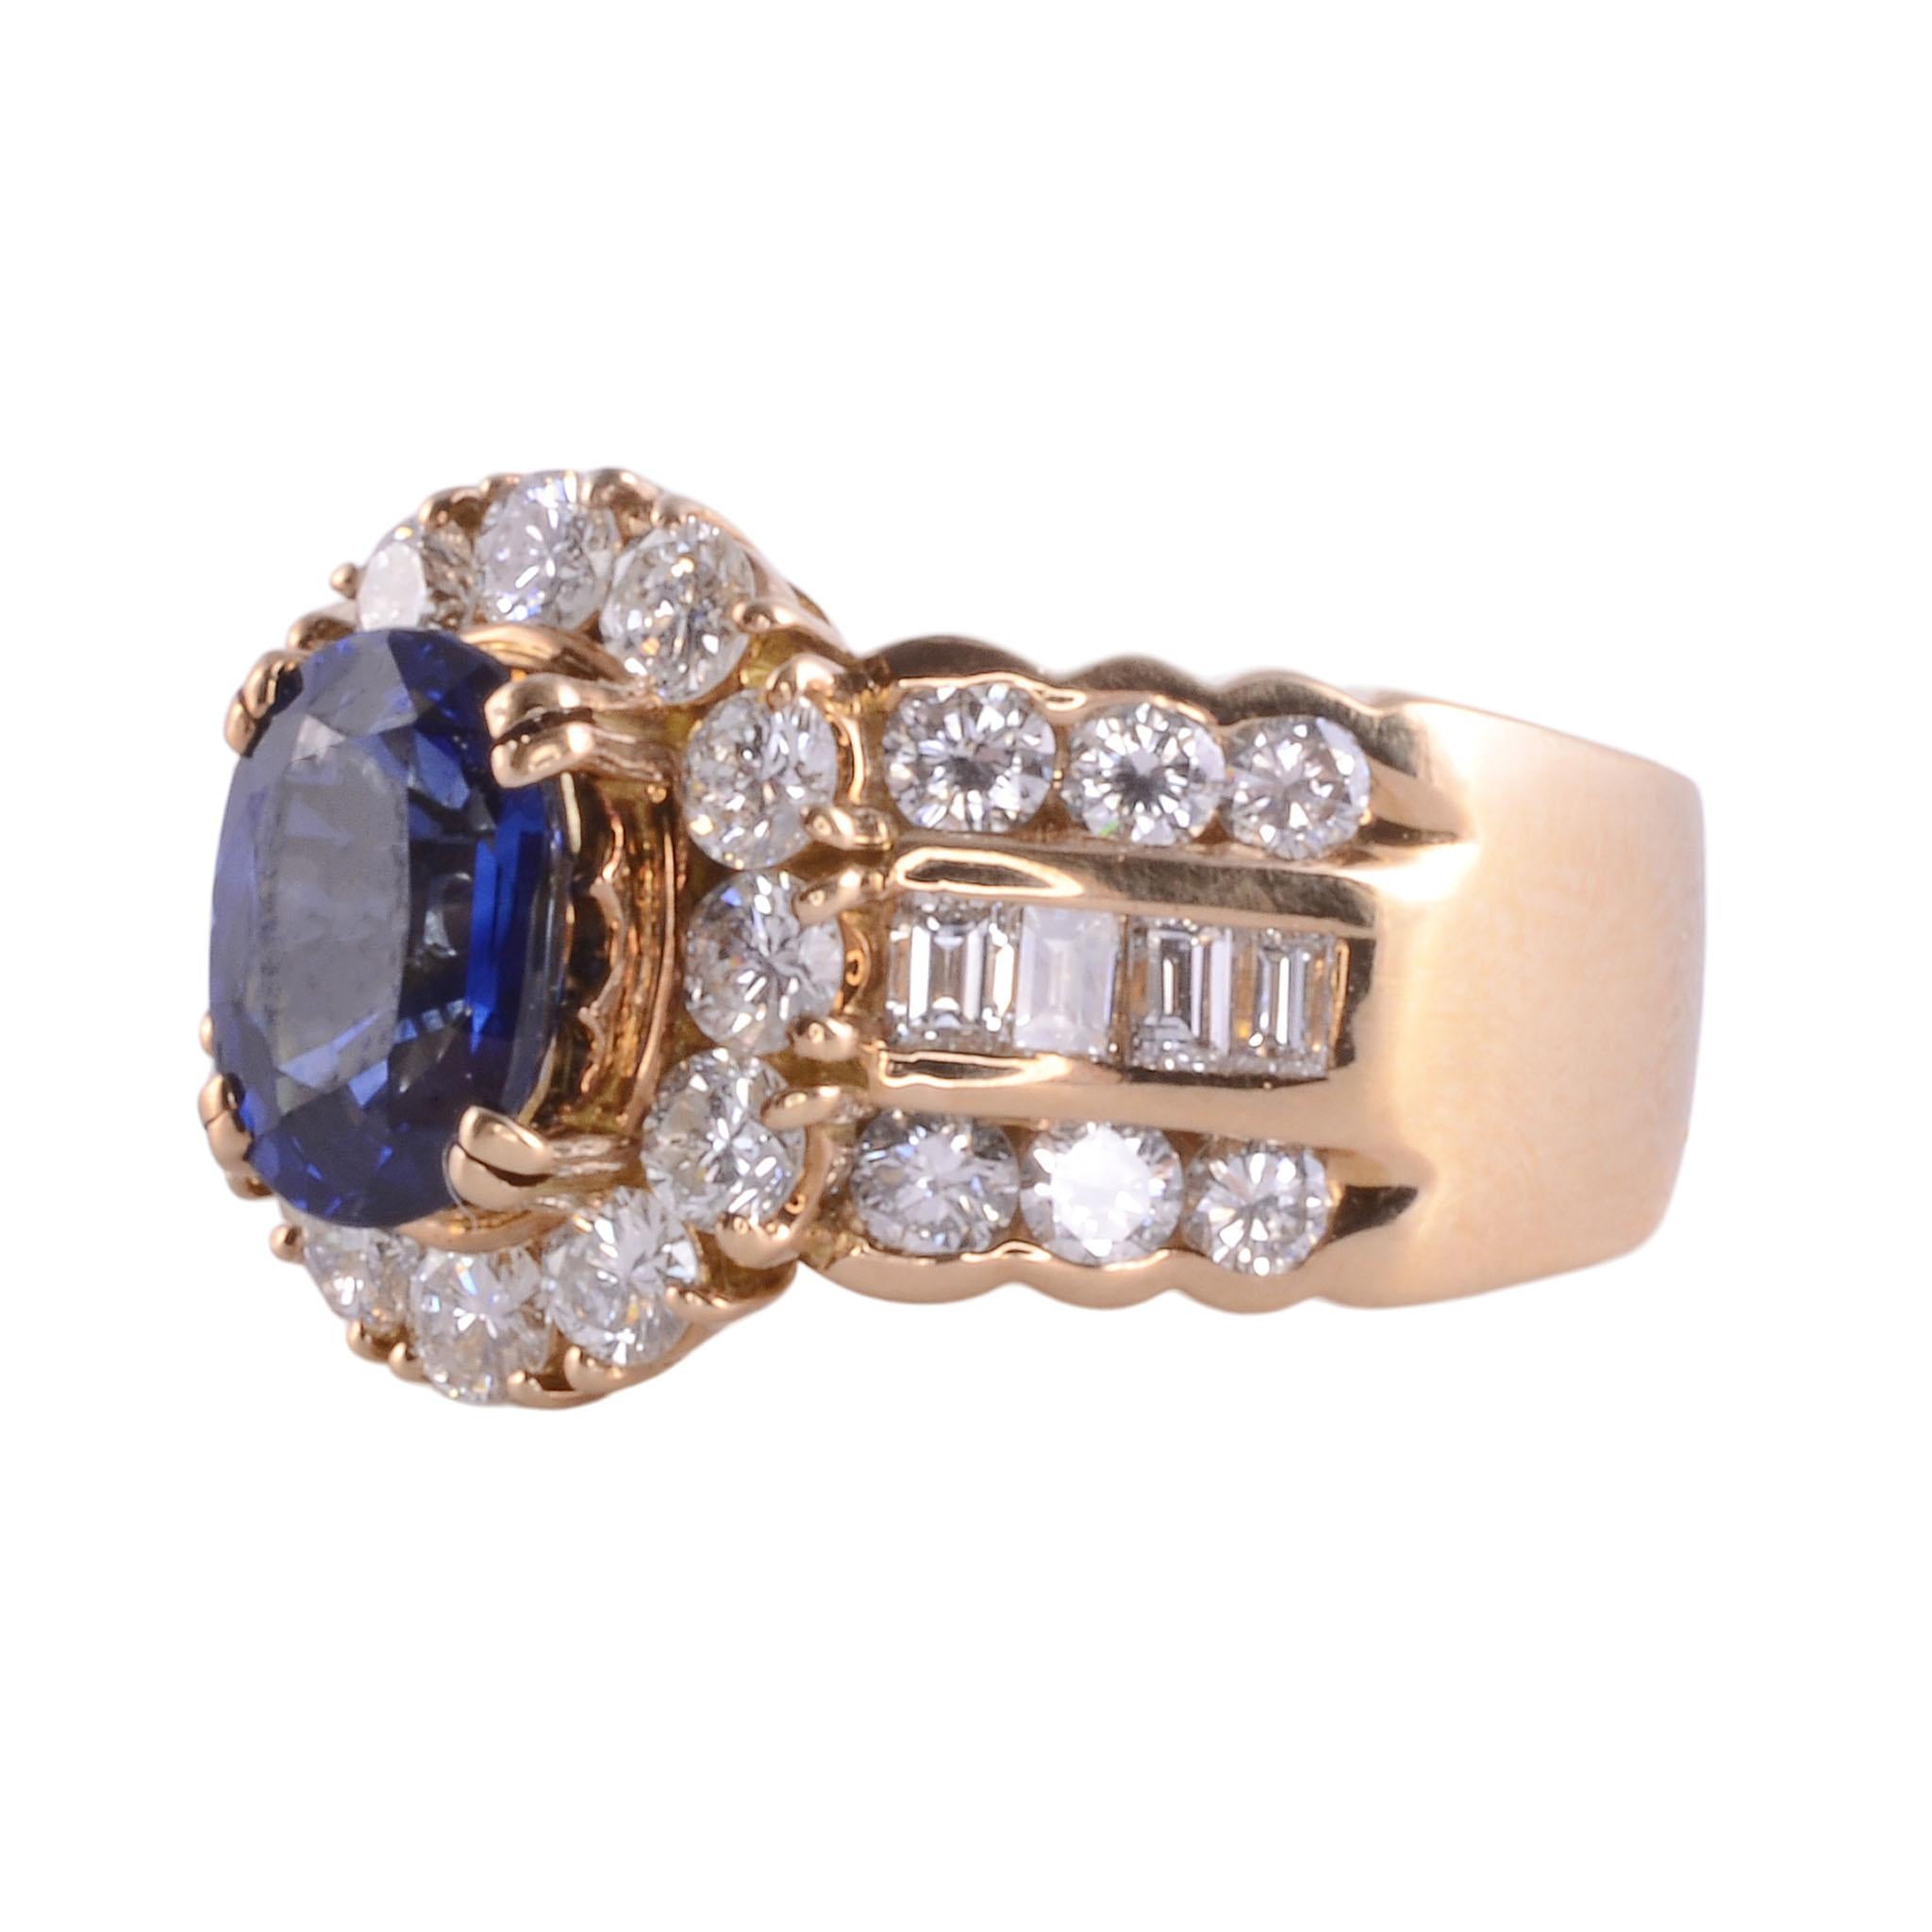 Estate sapphire & VS diamond 18K ring. This 18 karat yellow gold ring features a 1.86 carat oval sapphire center with fine bright blue color. The sapphire is accented with 1.72 carat total weight of round brilliant and baguette diamonds. These fine